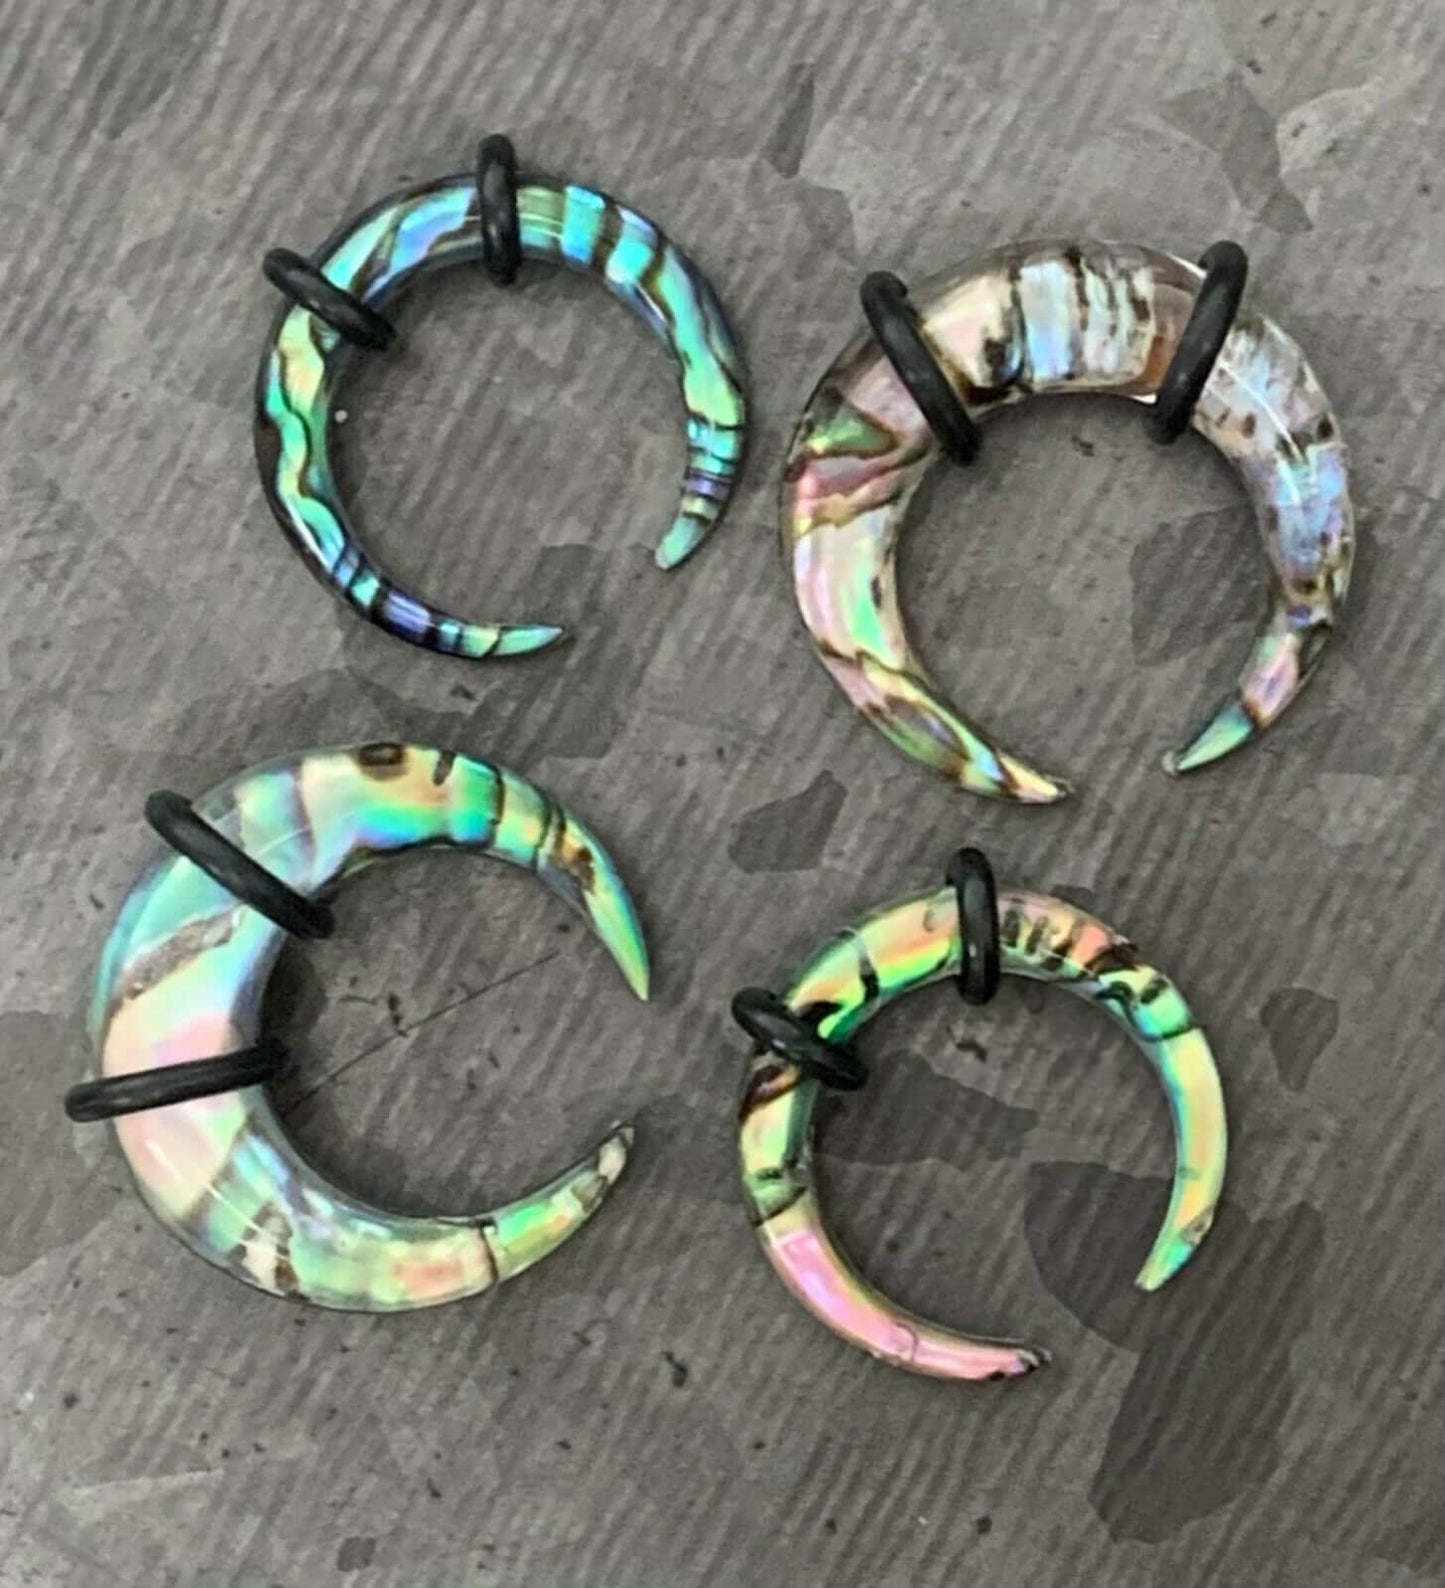 PAIR of Unique Organic Abalone Resin Buffalo Tapers Plugs - Gauges 6g (4mm) thru 0g (8mm) available!